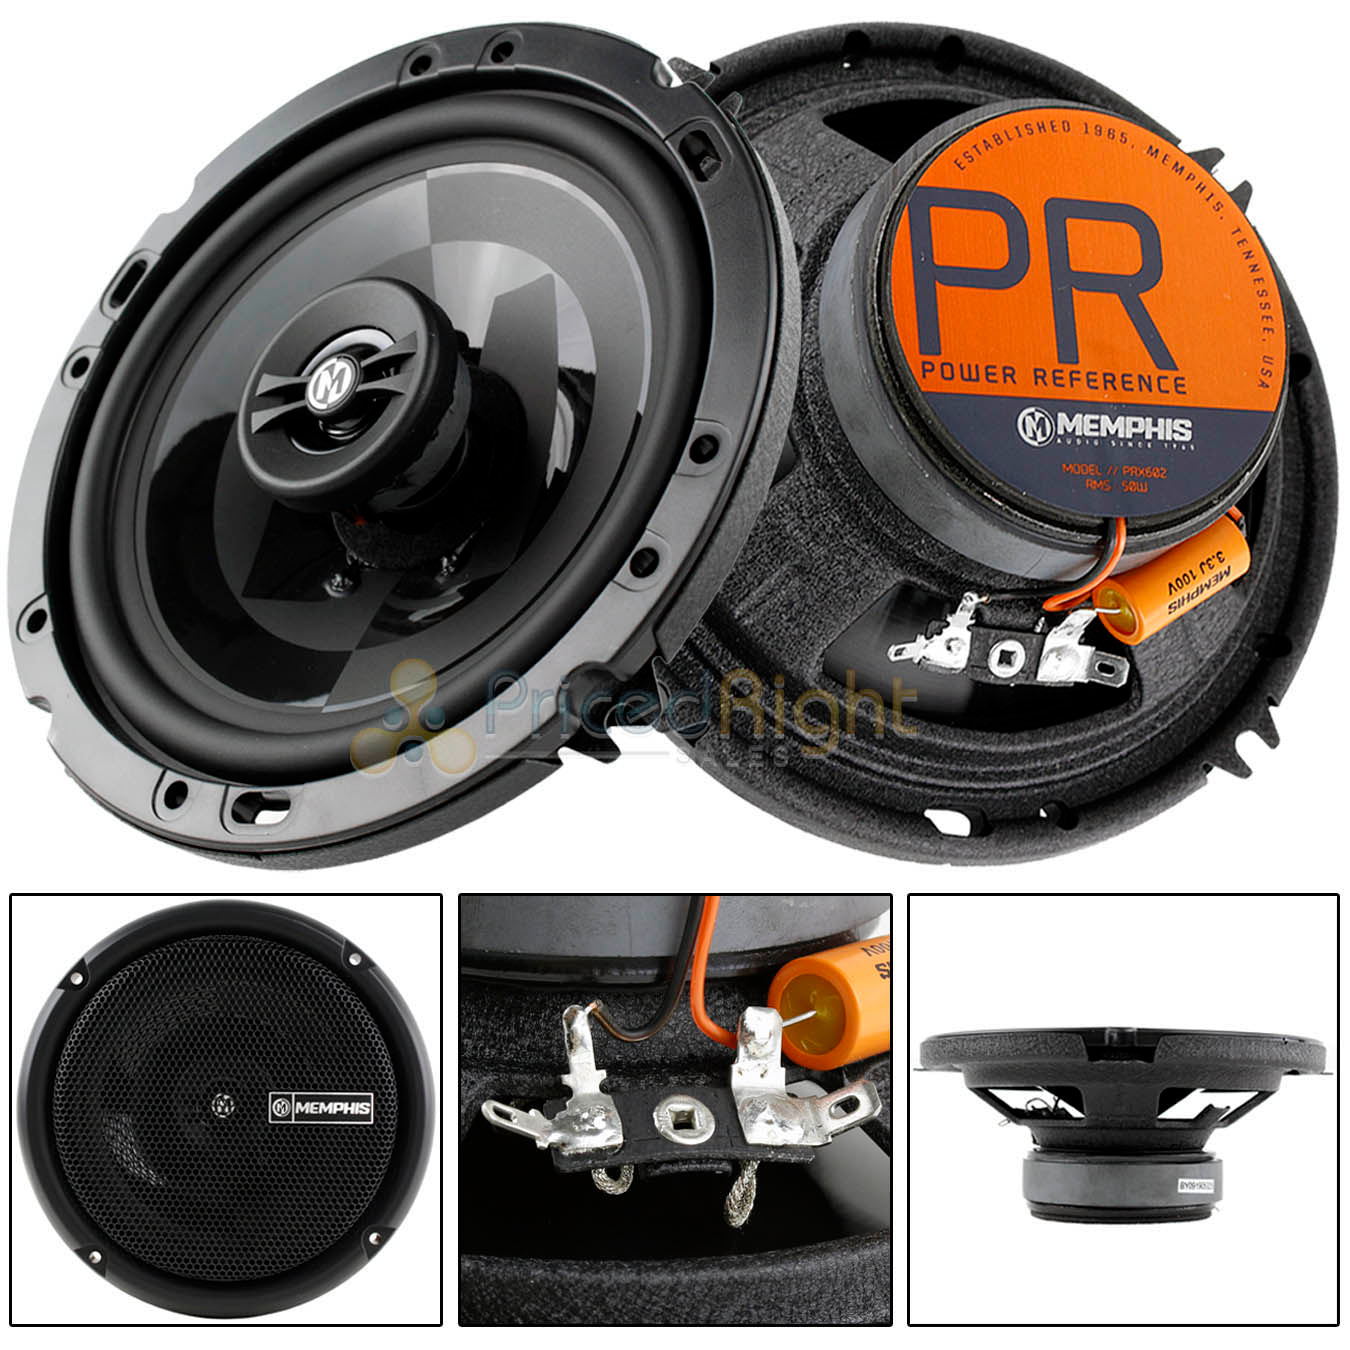 Memphis Audio 6.5" 2 Way Coaxial Speaker 100 Watts Max Power Reference PRX602